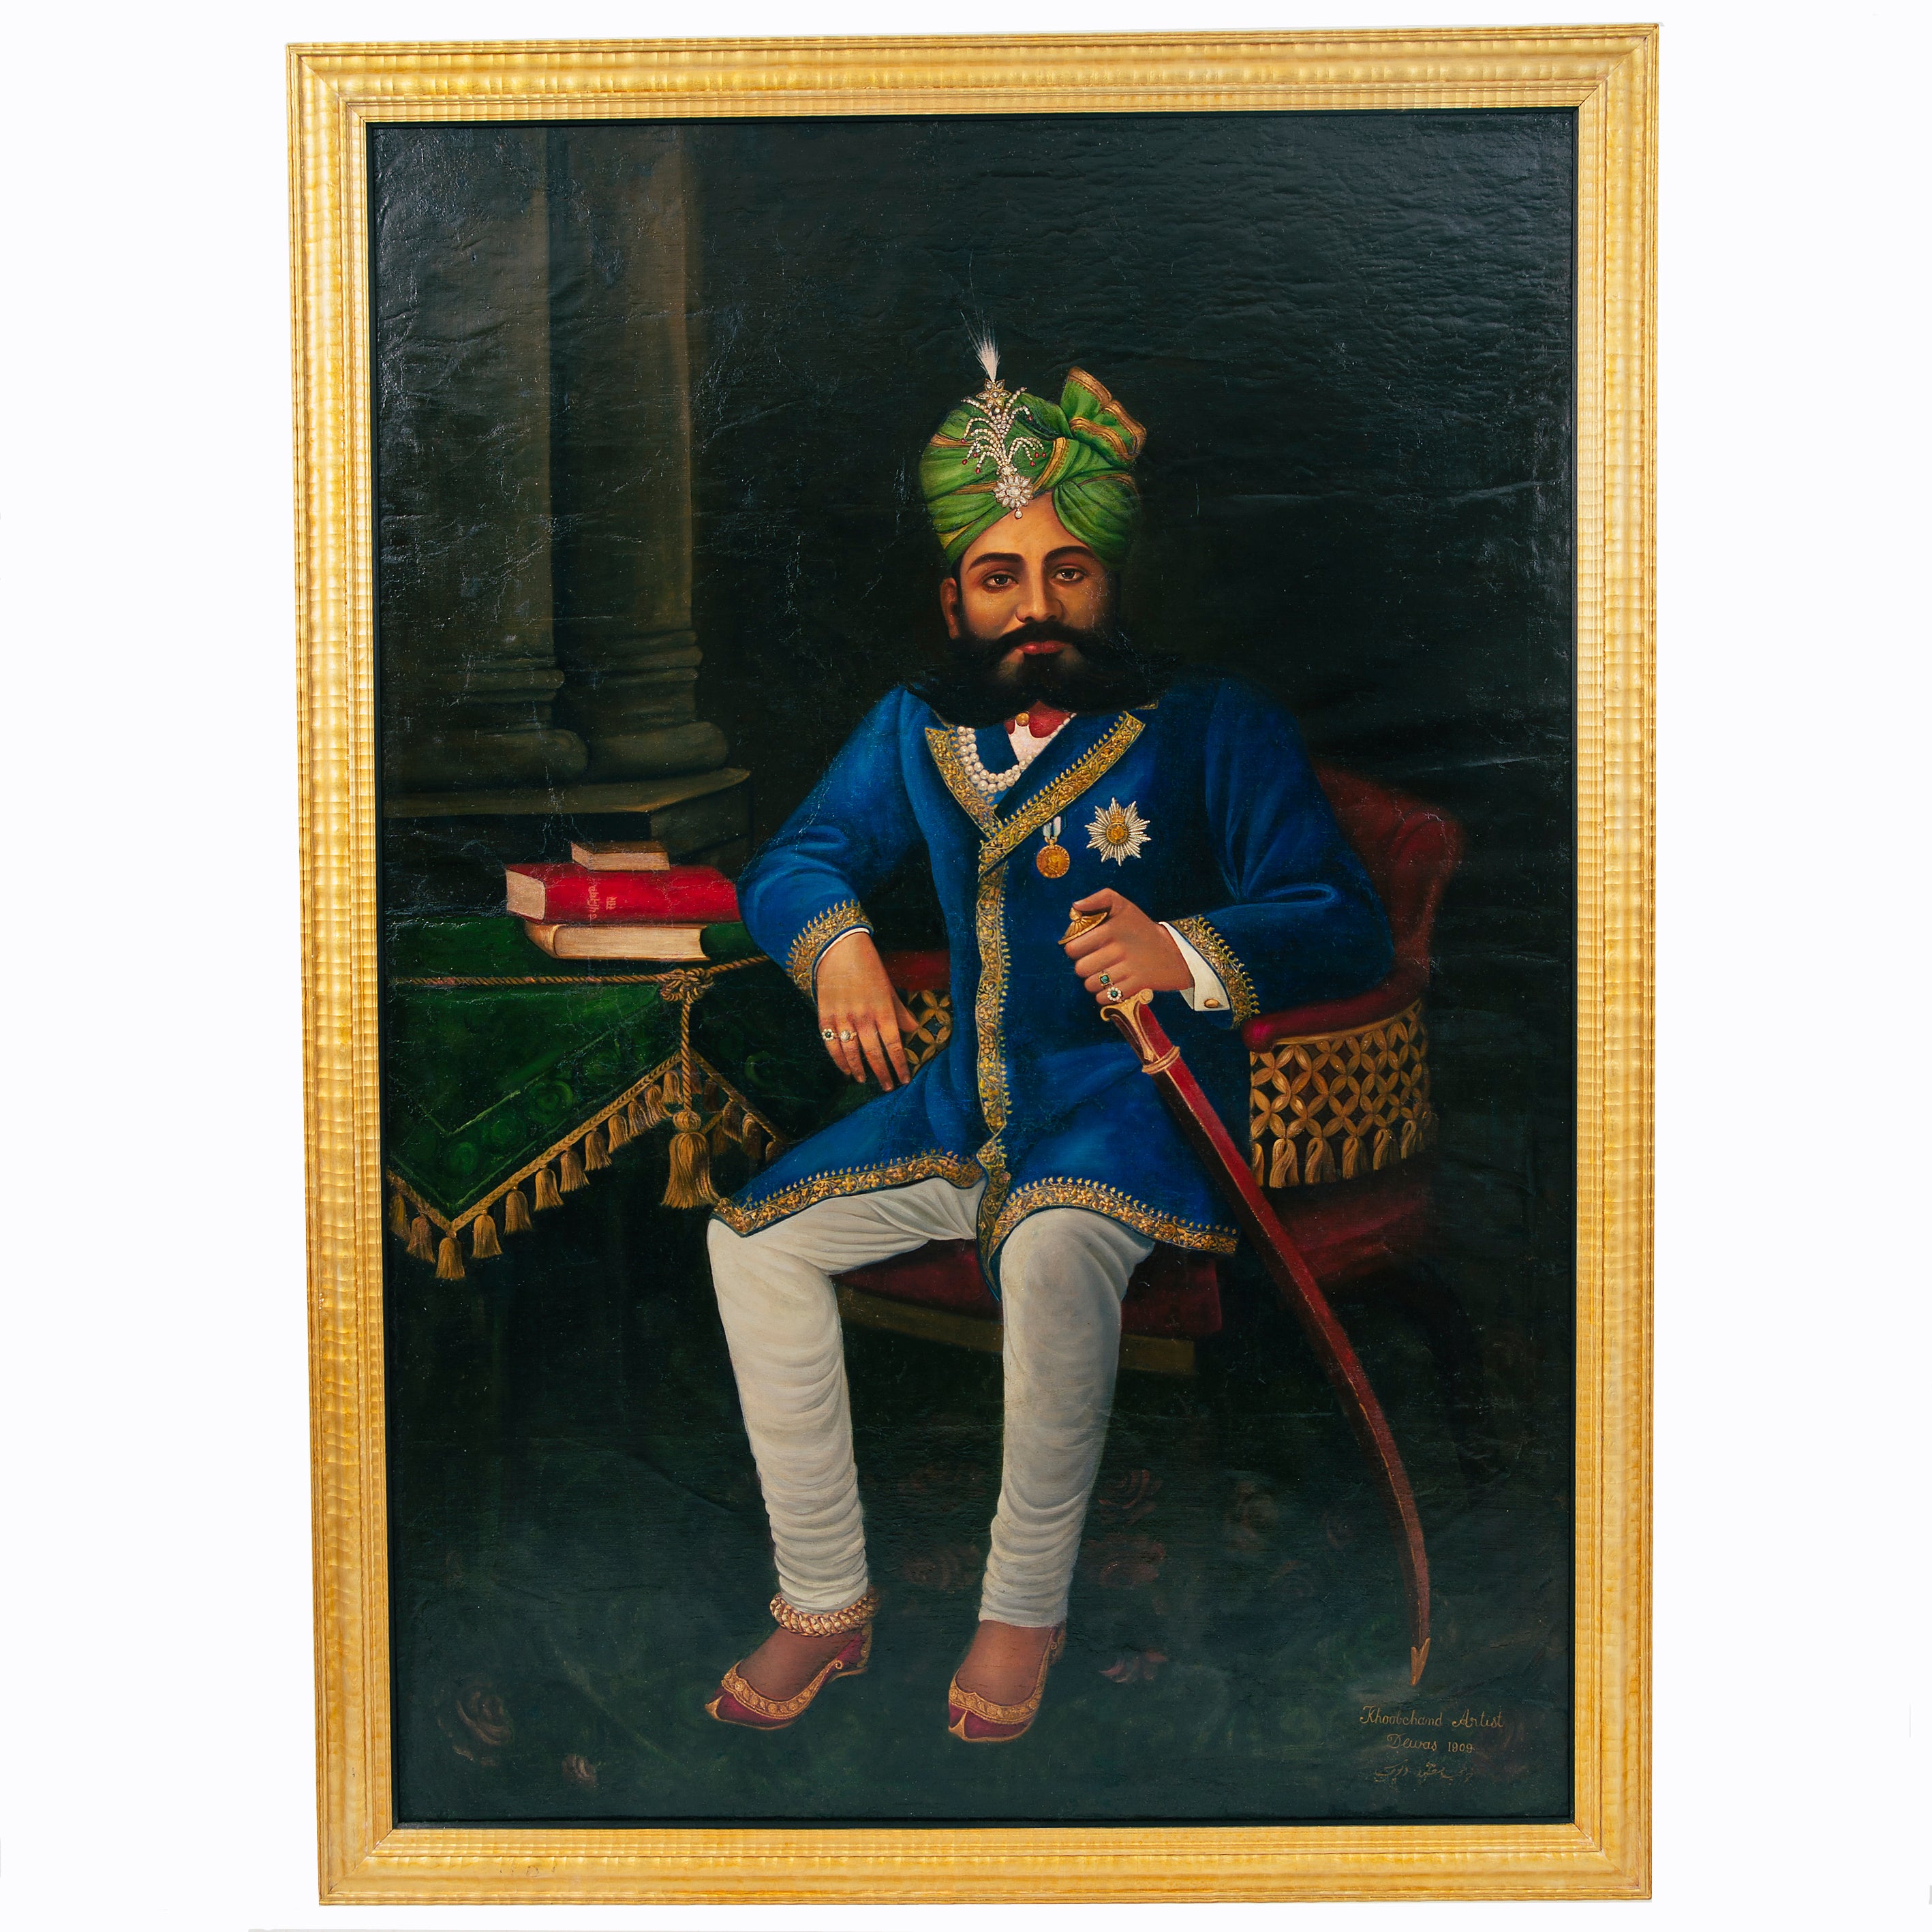 Large Naive Oil Painting of an Indian Maharaja - dated 1909